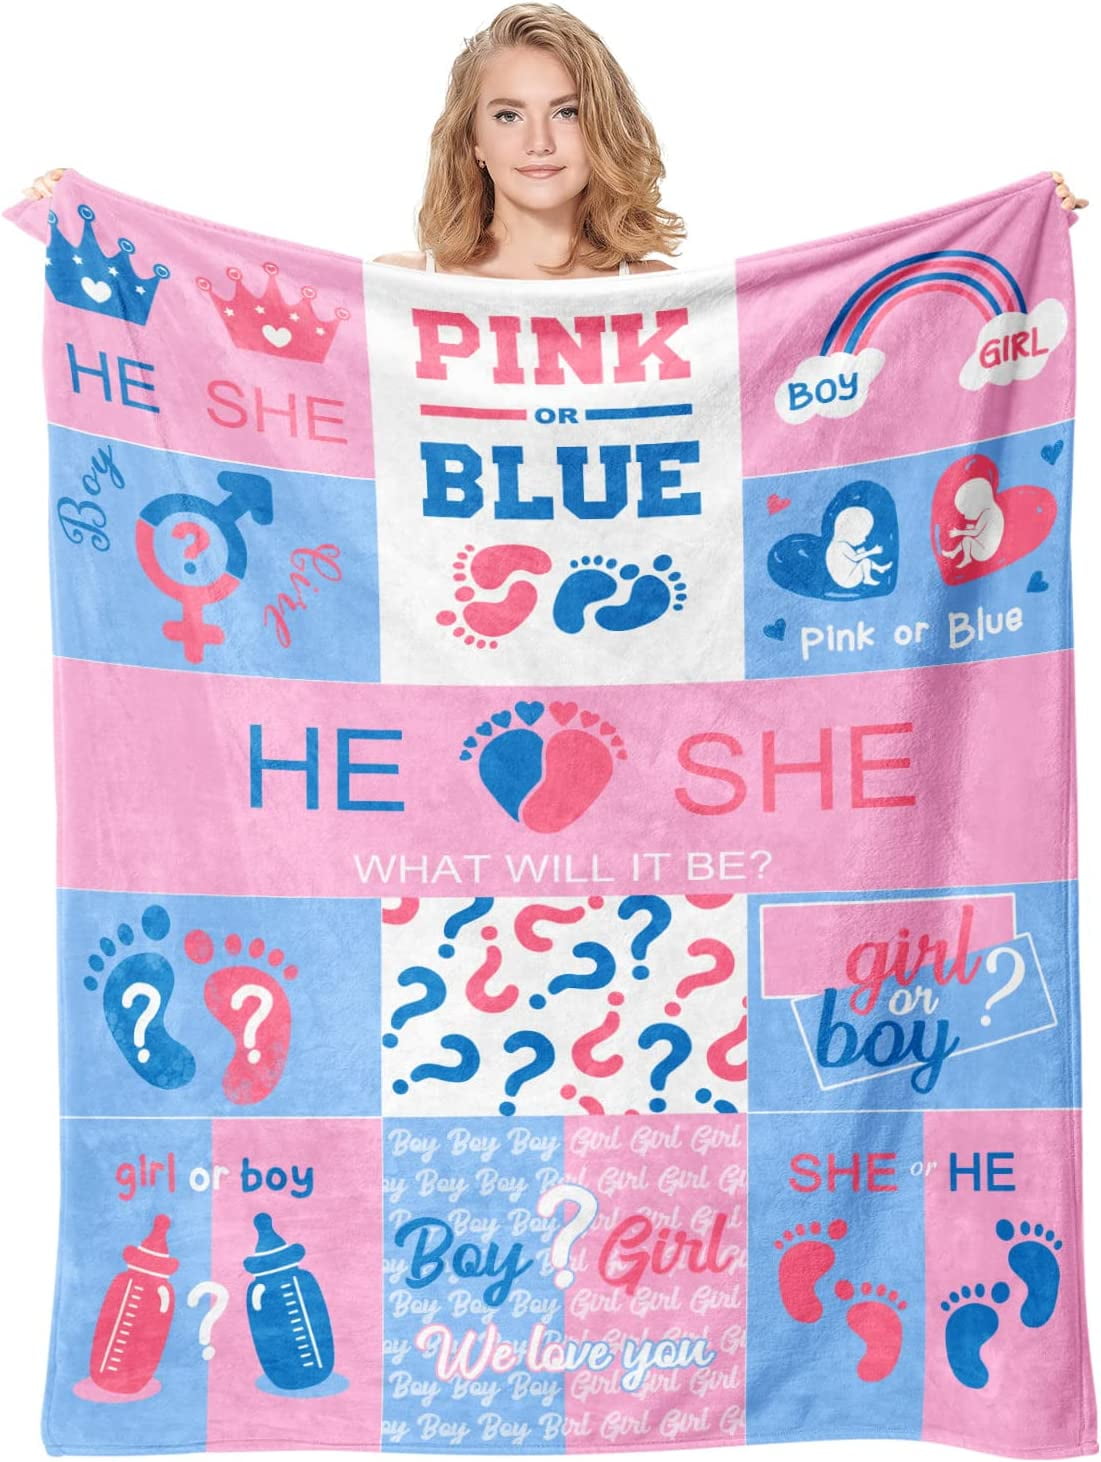 New Mom Gifts for Women,Mom to be Blanket,First Time Mom Gifts Ideas,Best  Gift for New Mom Mommy After Birth,New Pregnancy Gifts for Mom Throw  Blanket,Gender Reveal Gifts,32x48''(#328,32x48'')E 